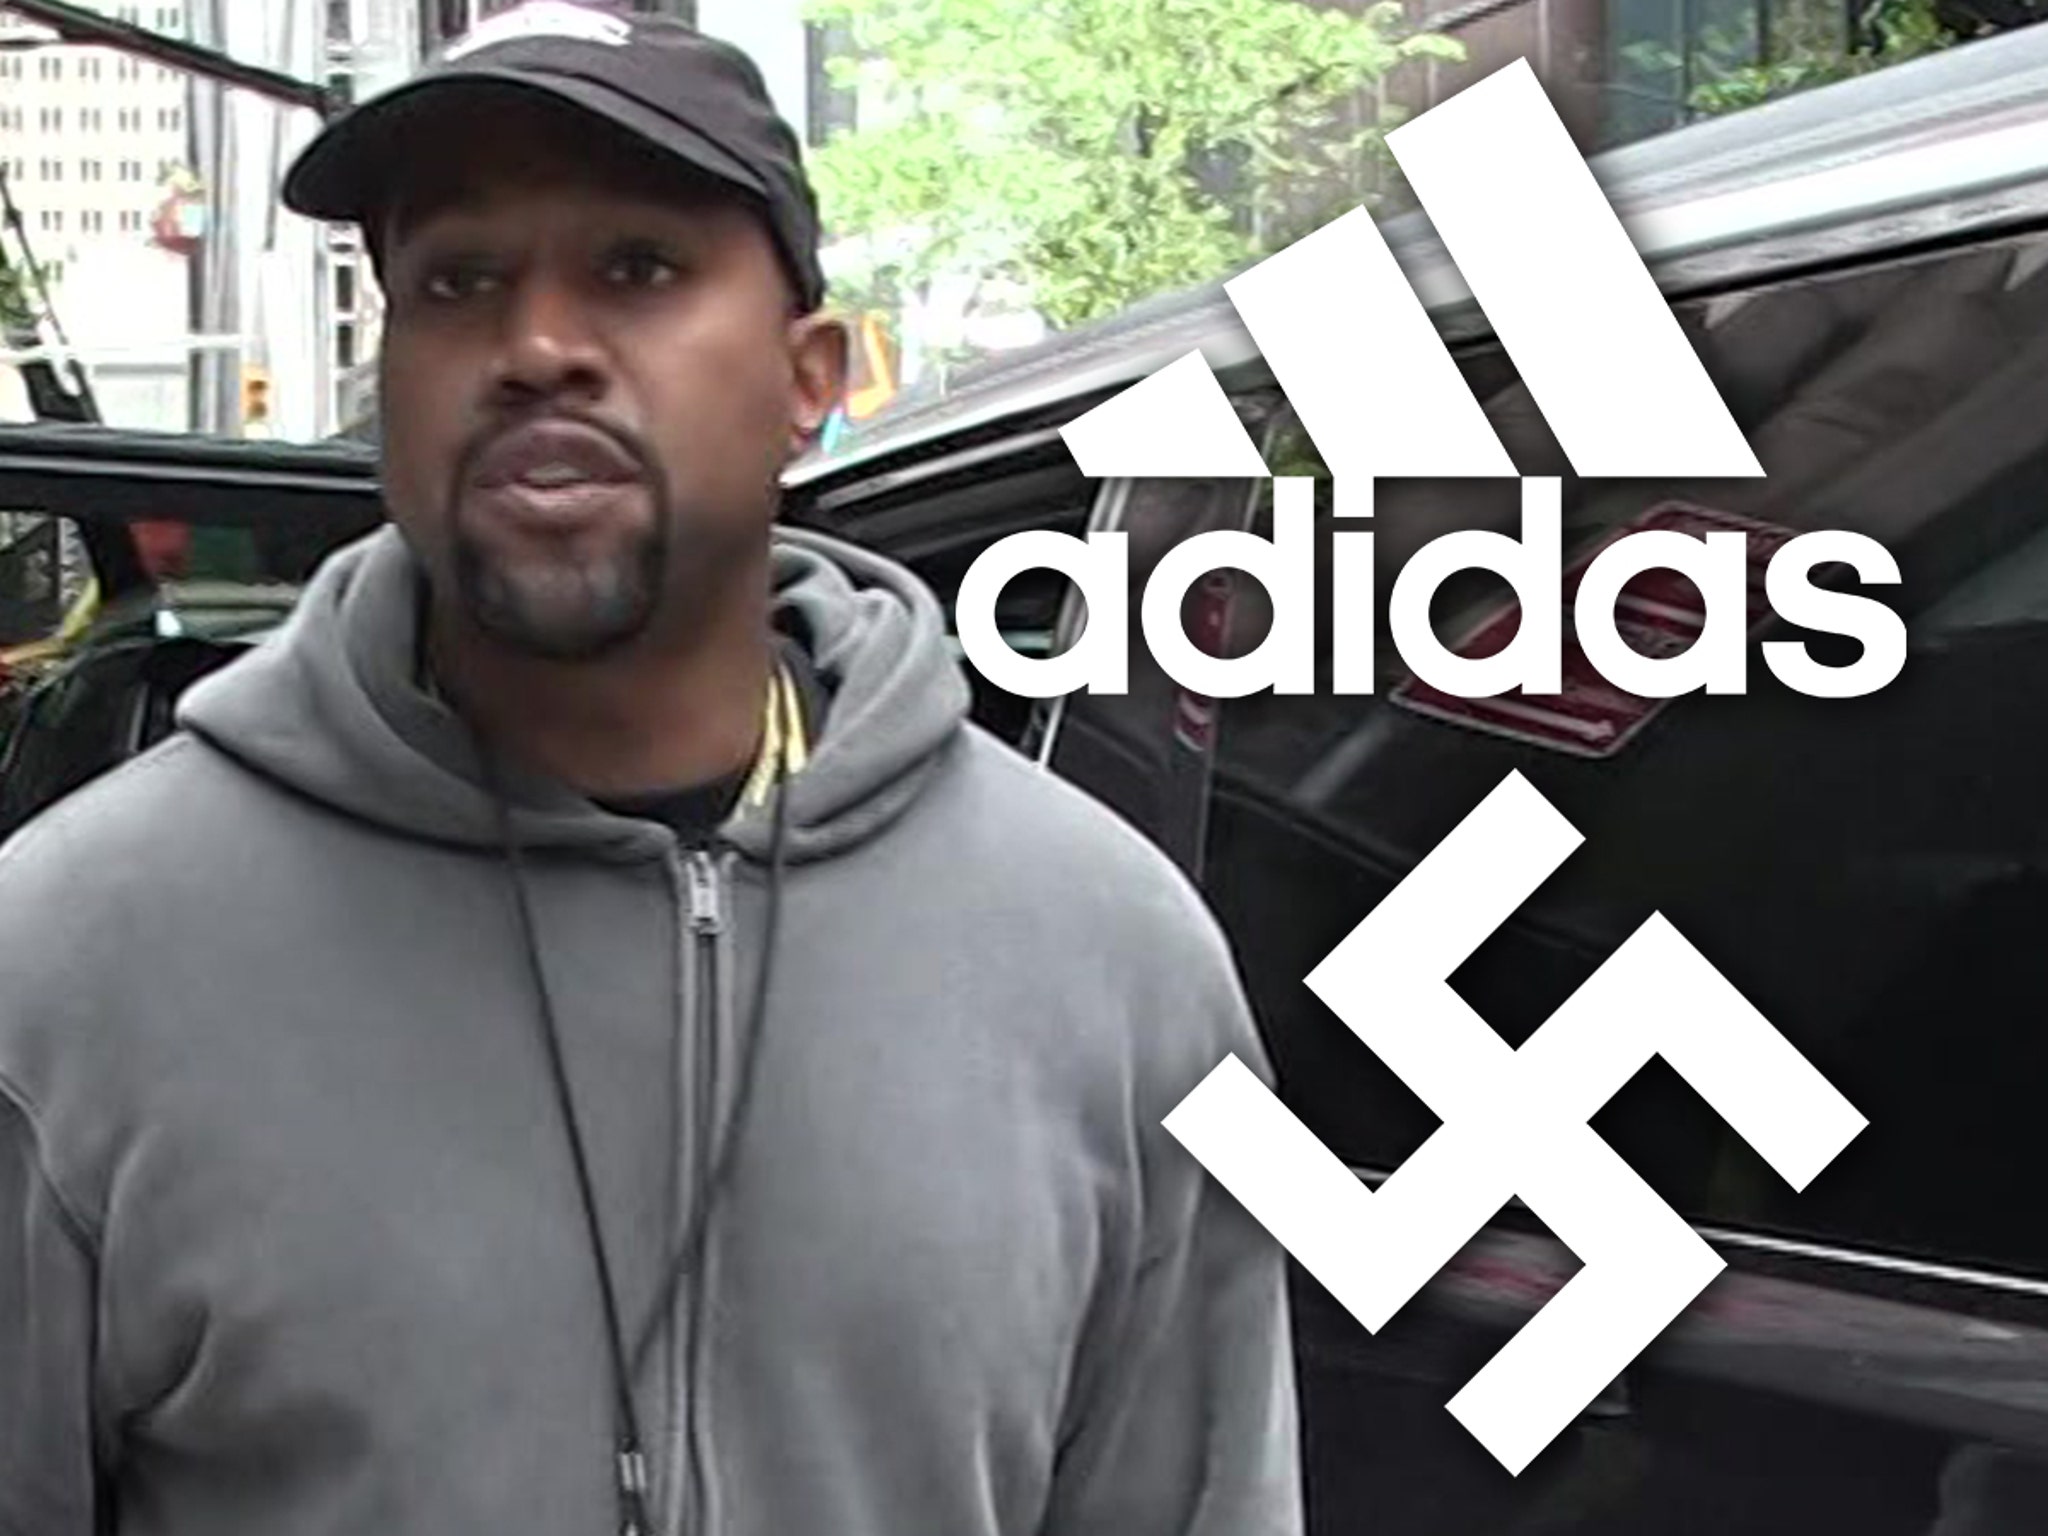 Kanye West's Yeezy: Abrupt Firings and Alleged Nazi Inspirations